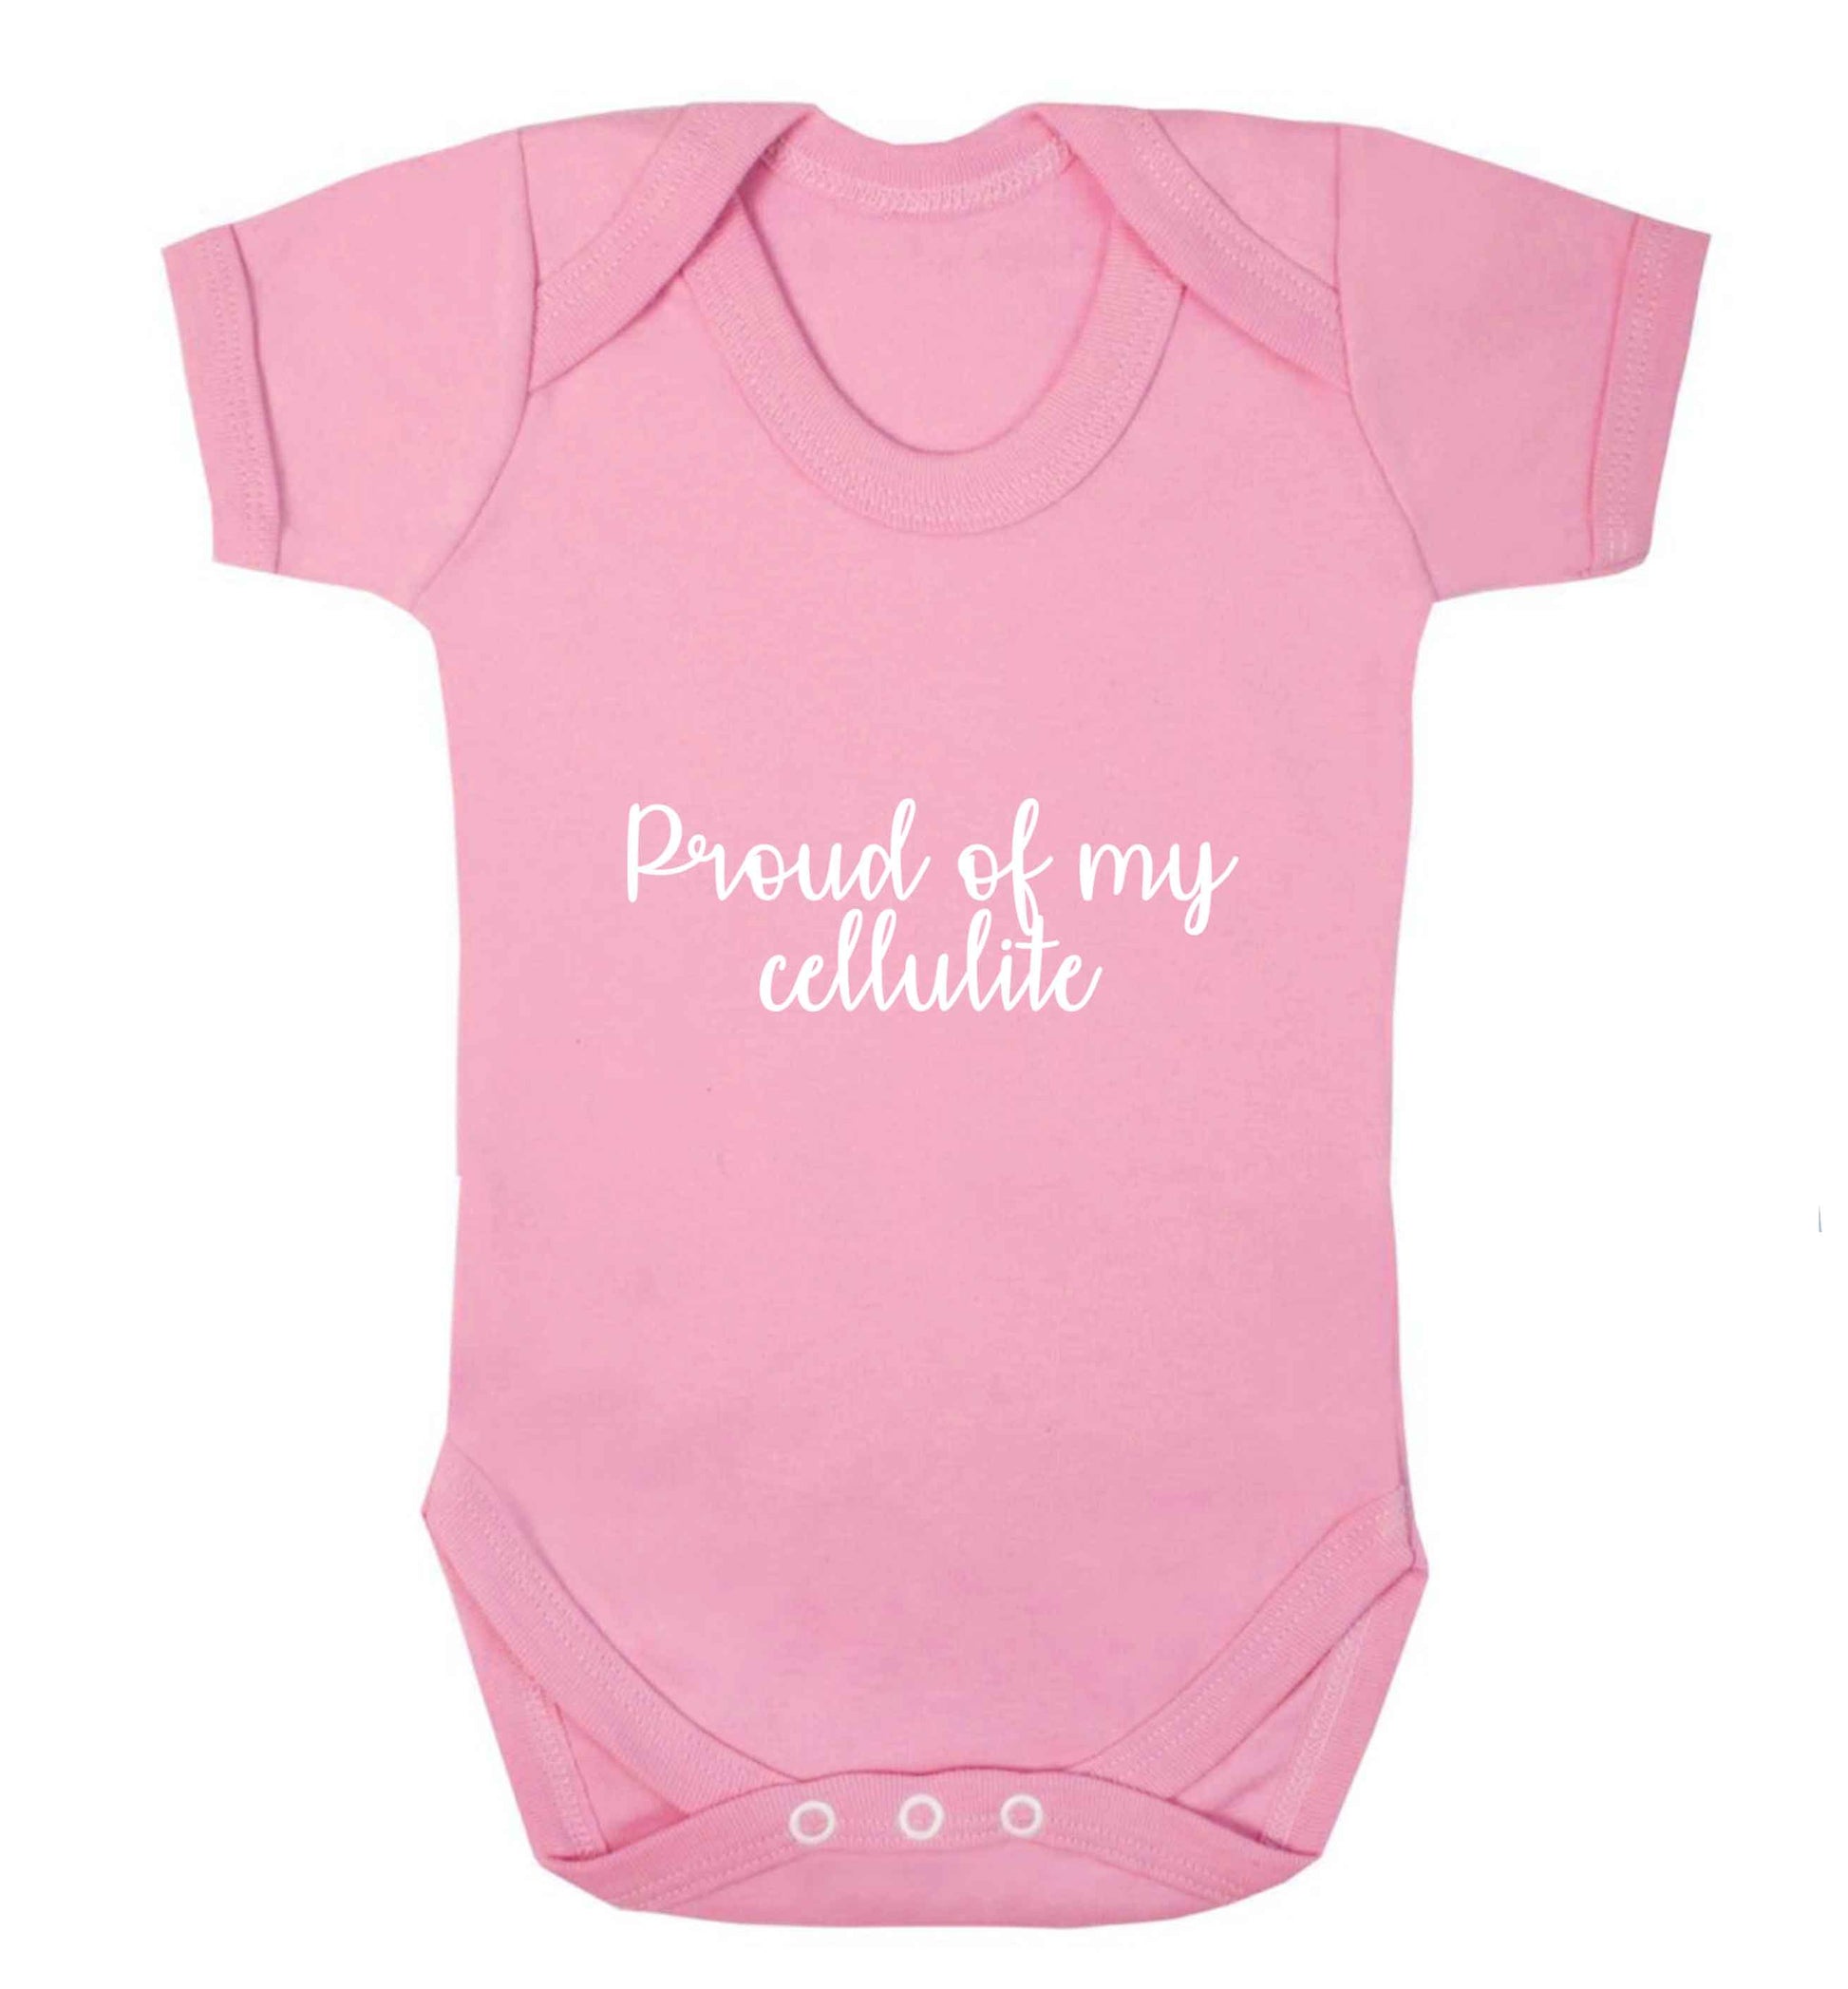 Proud of my cellulite baby vest pale pink 18-24 months